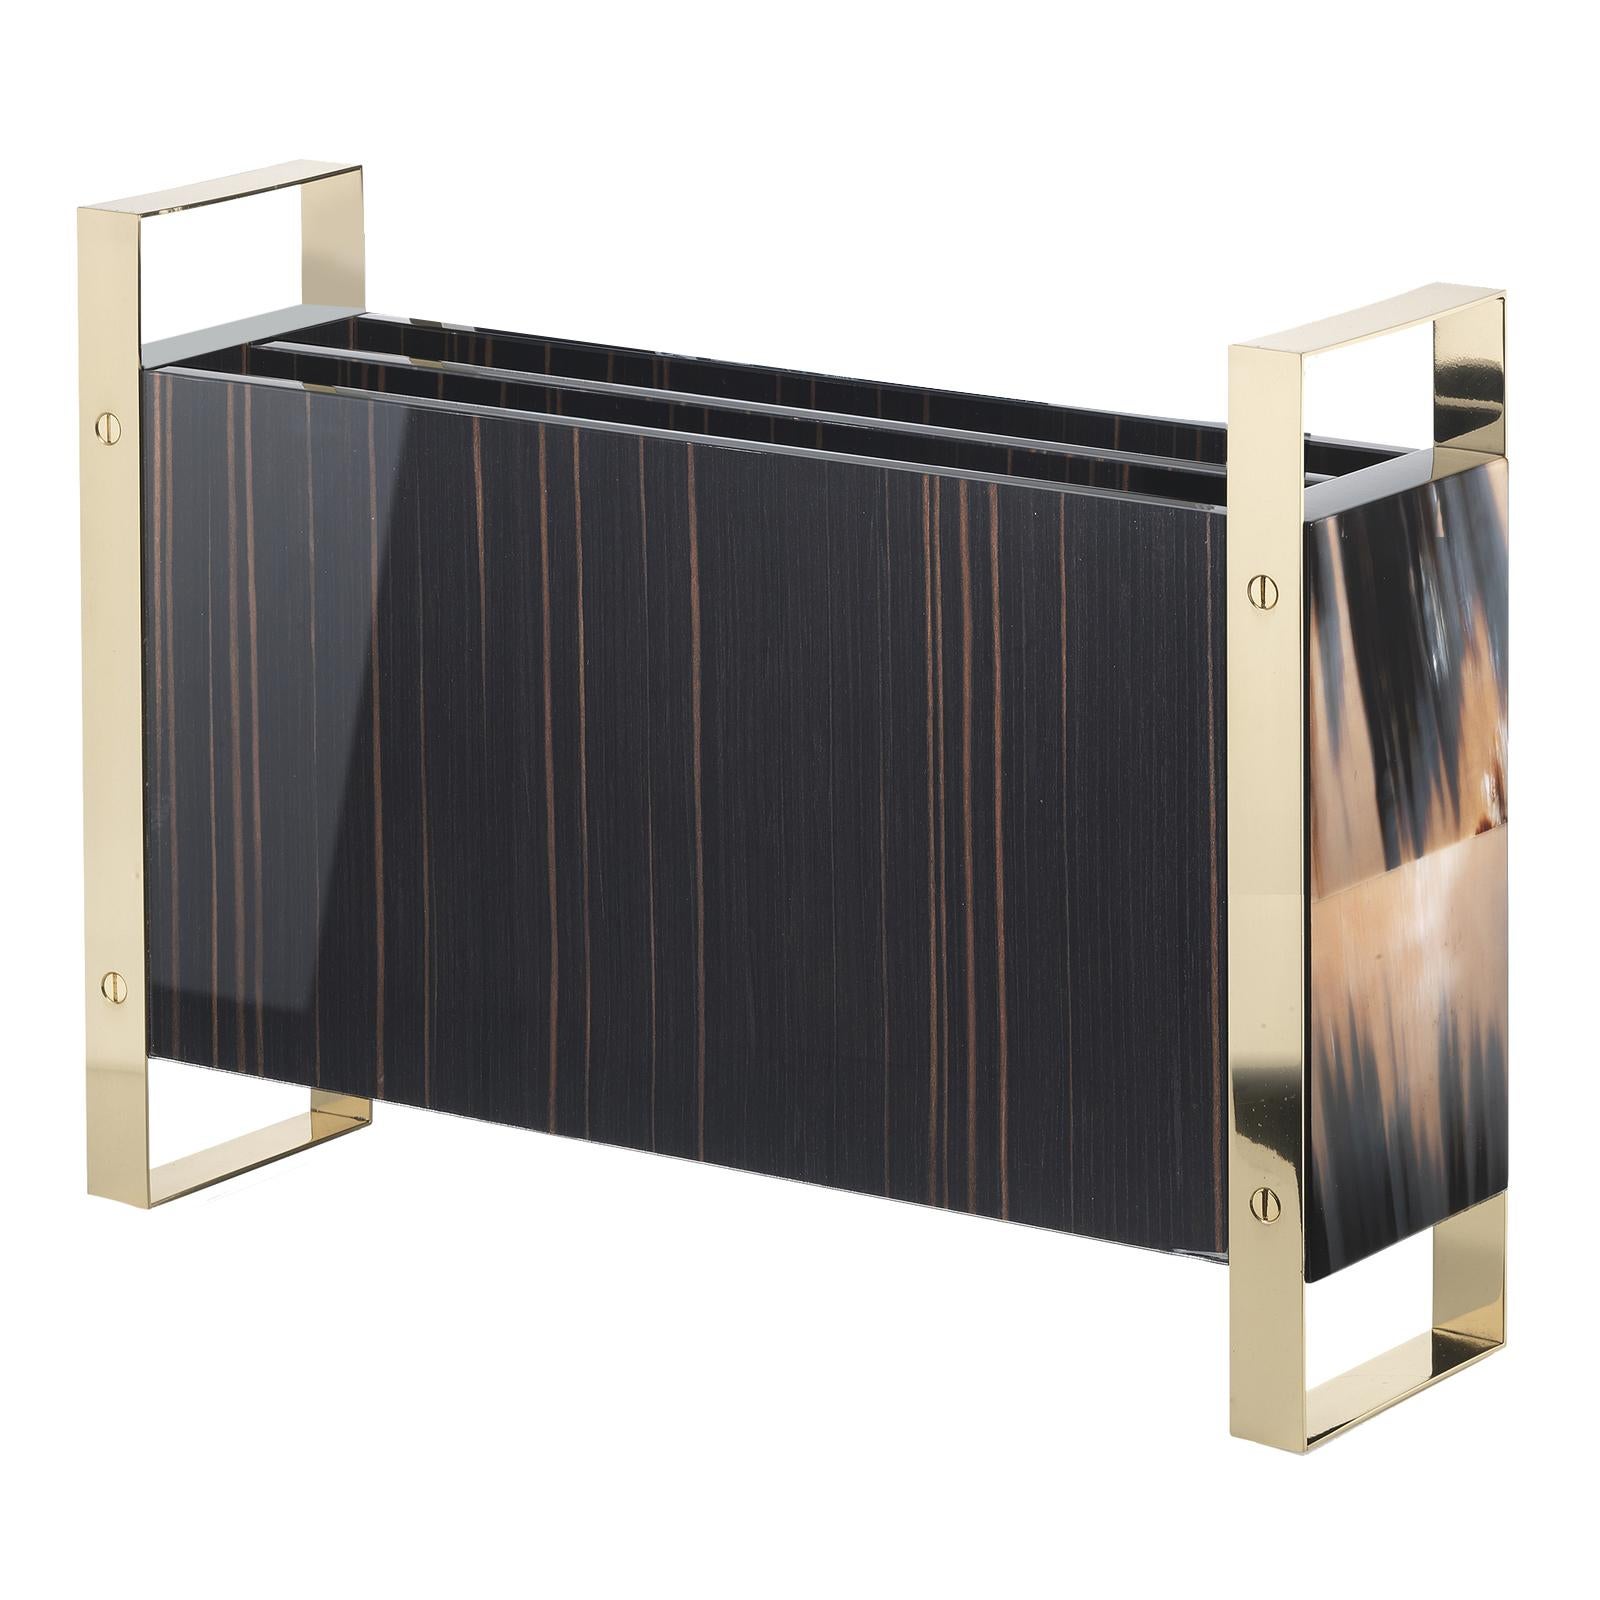 With clear lines and Classic elegance, this magazine holder is an easy way to add a chic accent to any space. The superb design is functional with understated style, bringing together the contrasting dark ebony and the shiny, 24-karat gold-plated